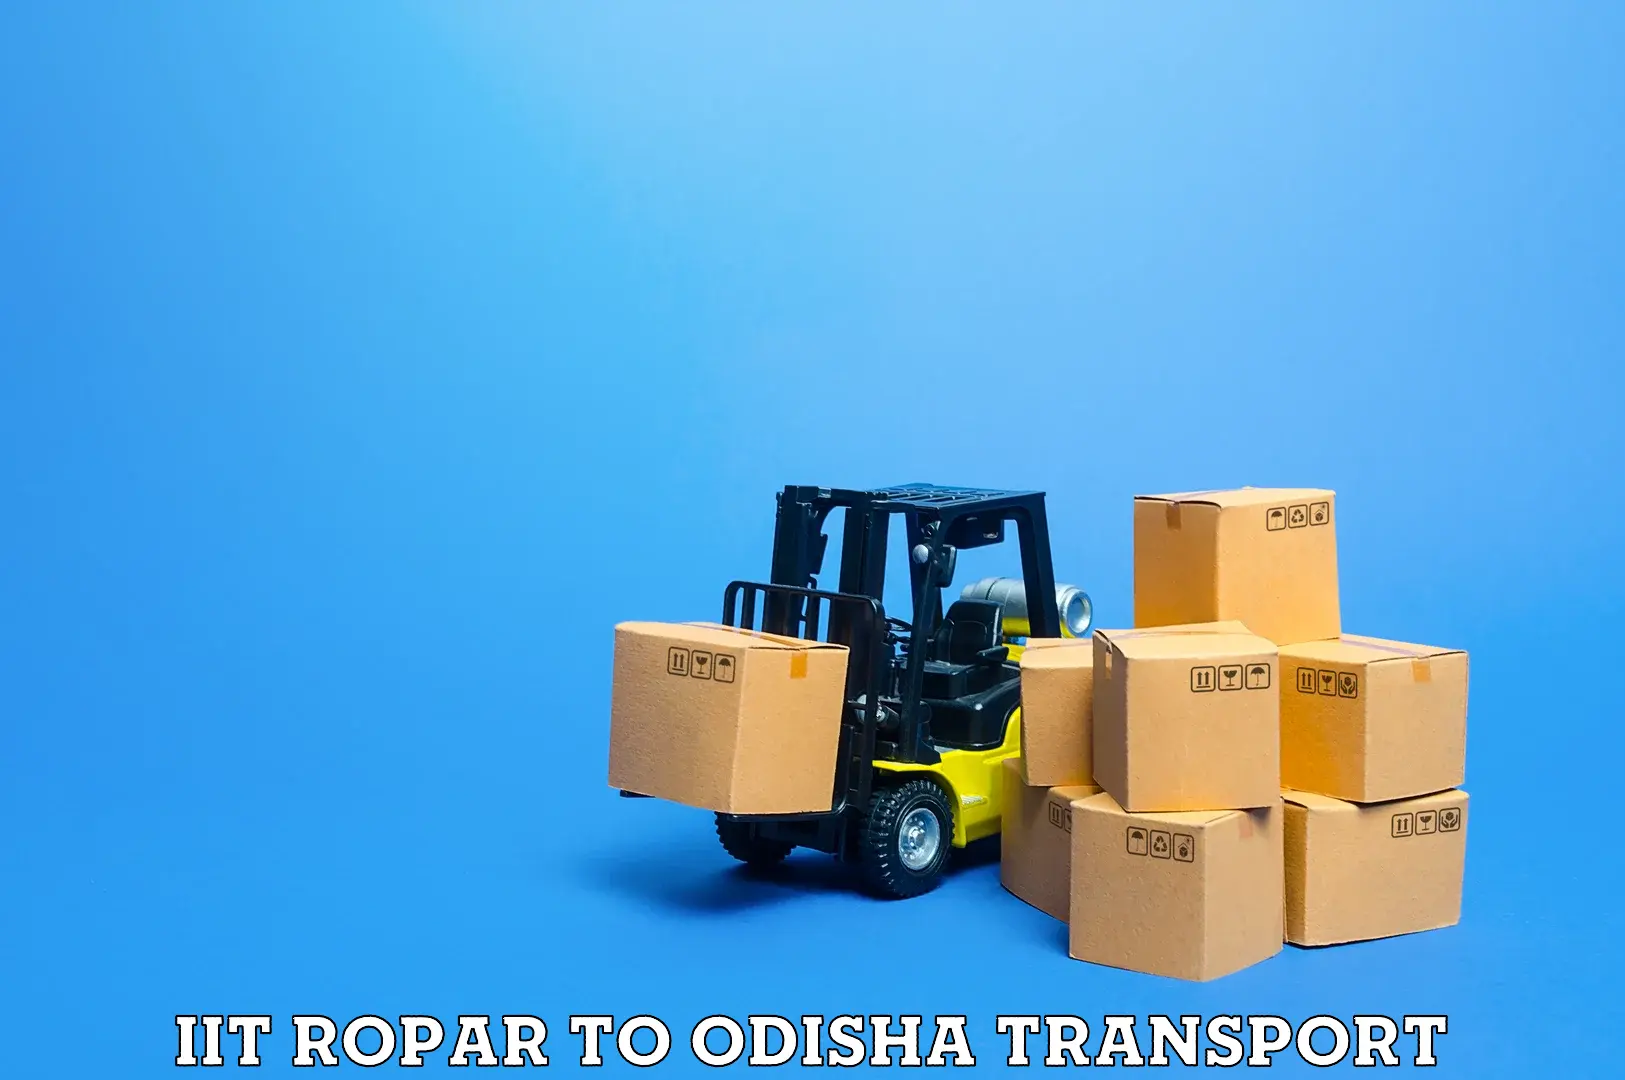 Nearby transport service IIT Ropar to Delang